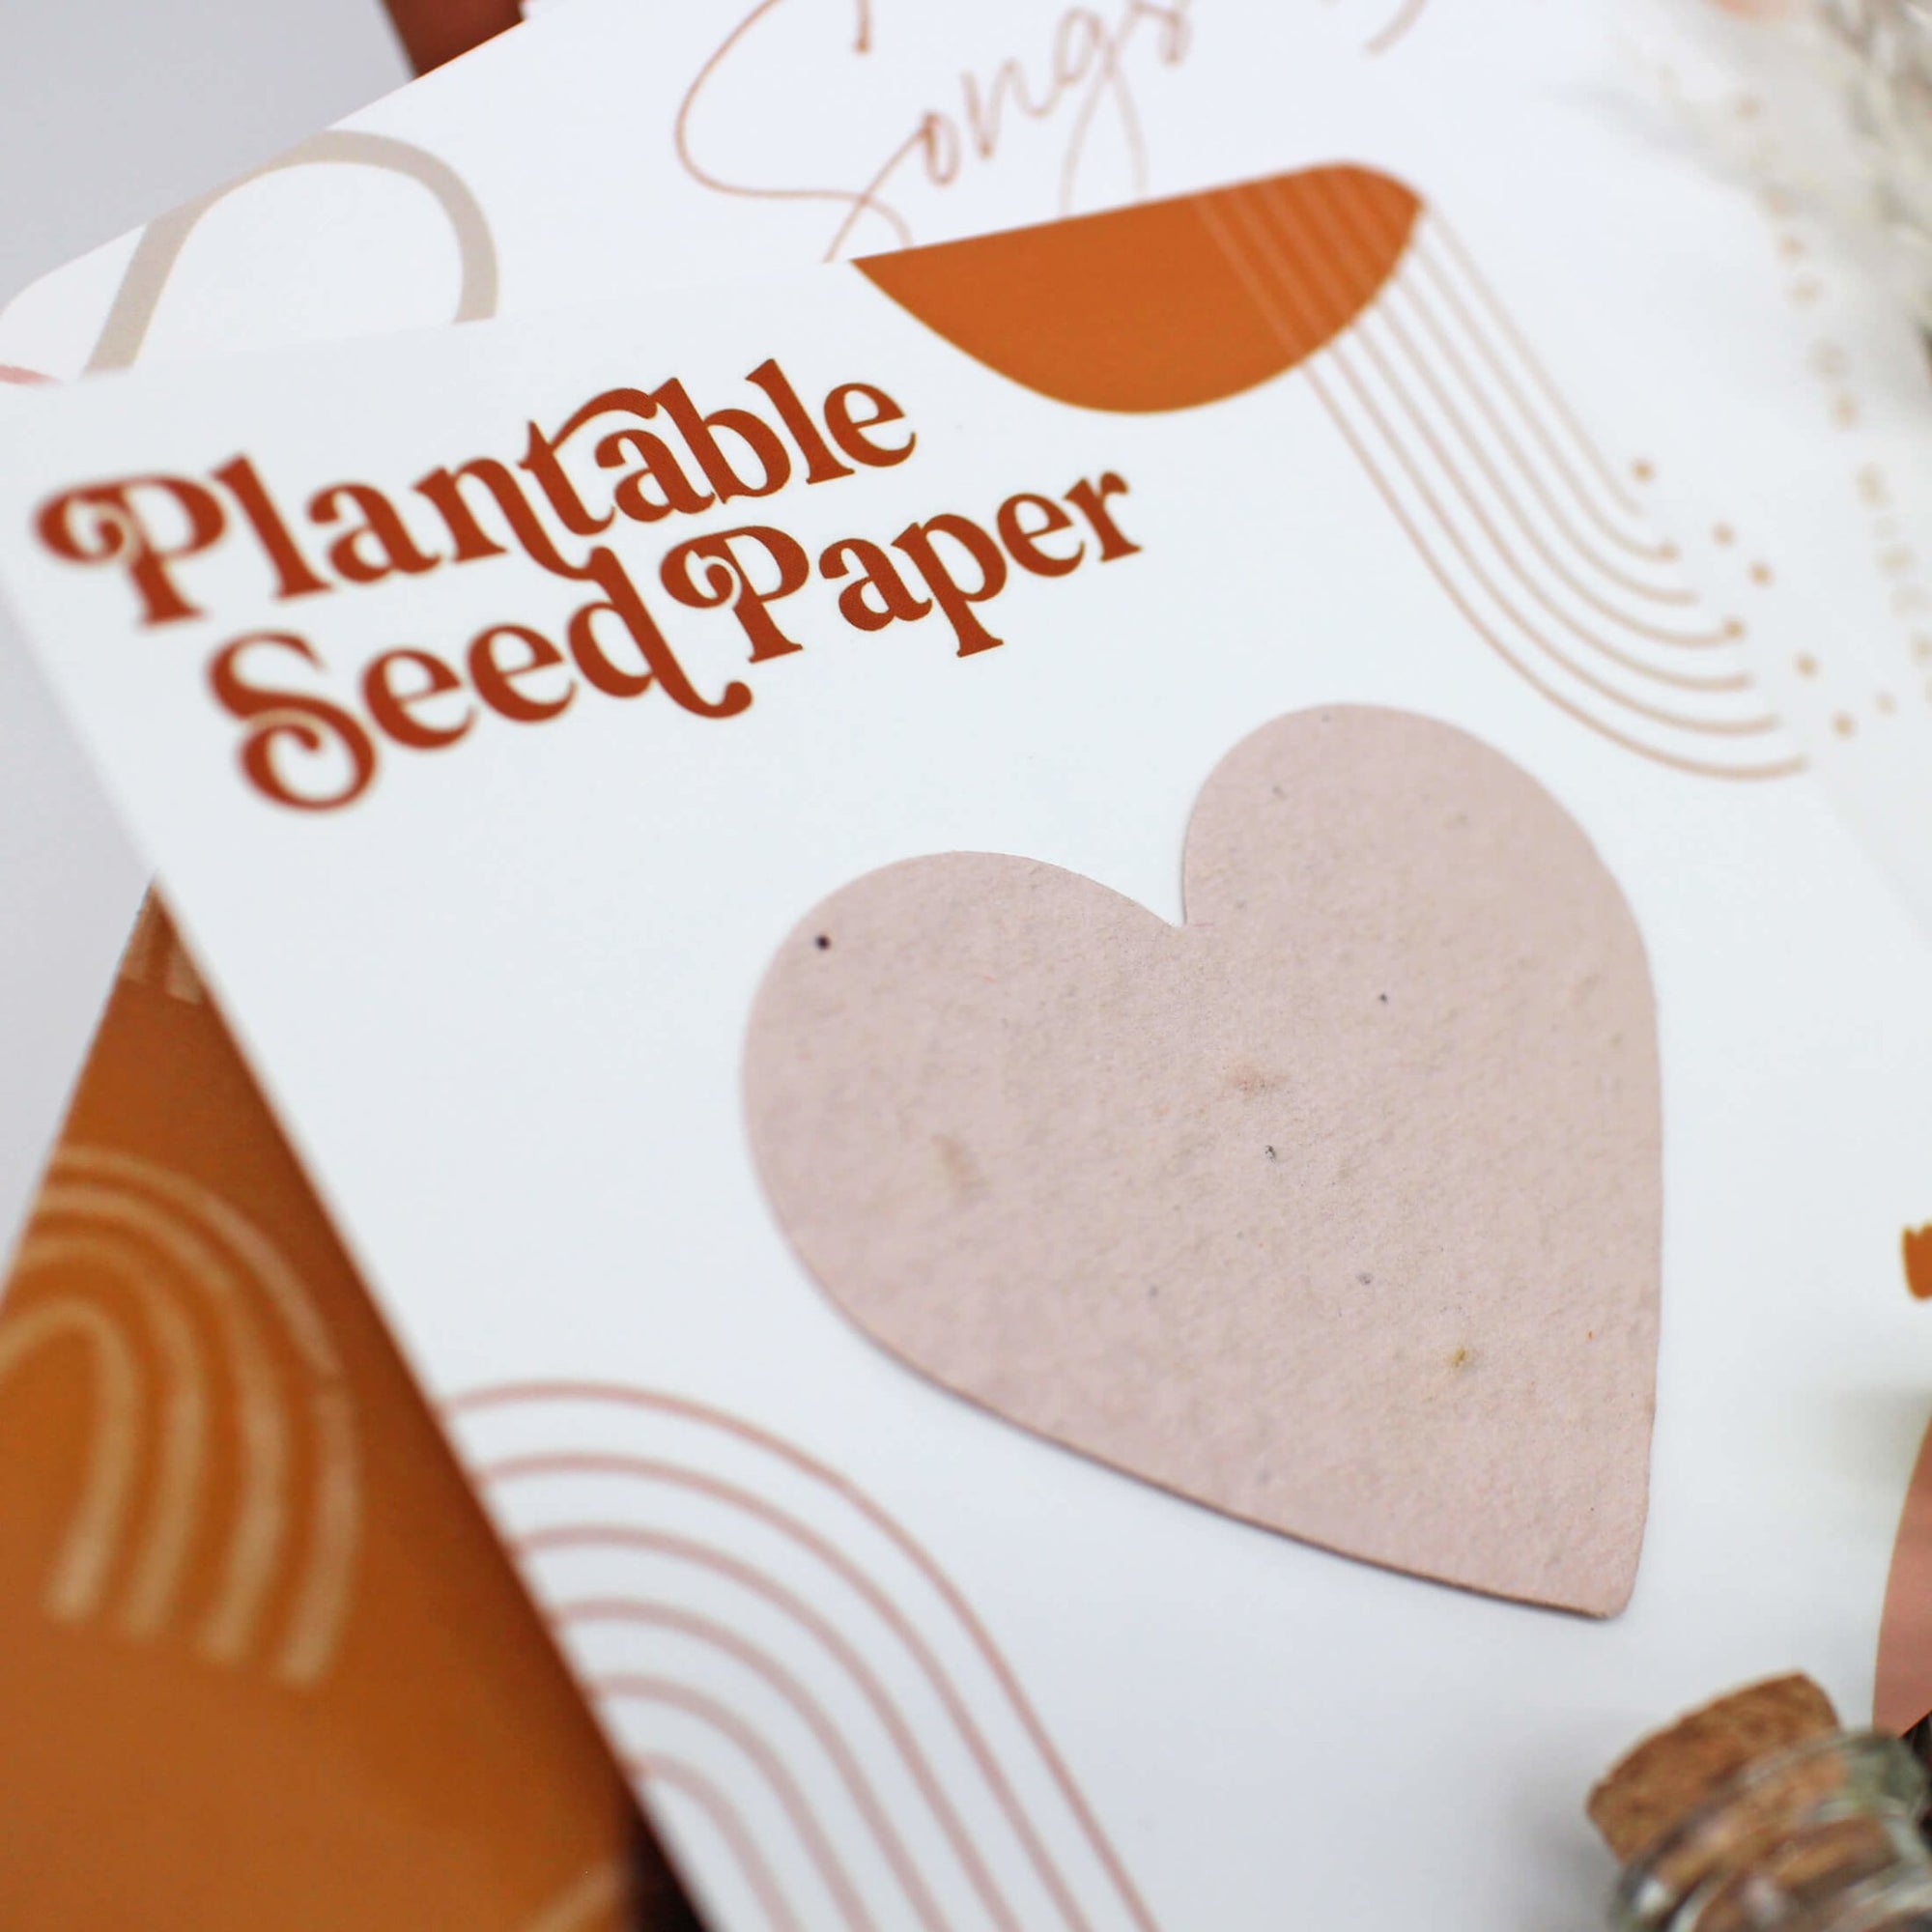 Plantable Seed Heart Card - Due To Joy